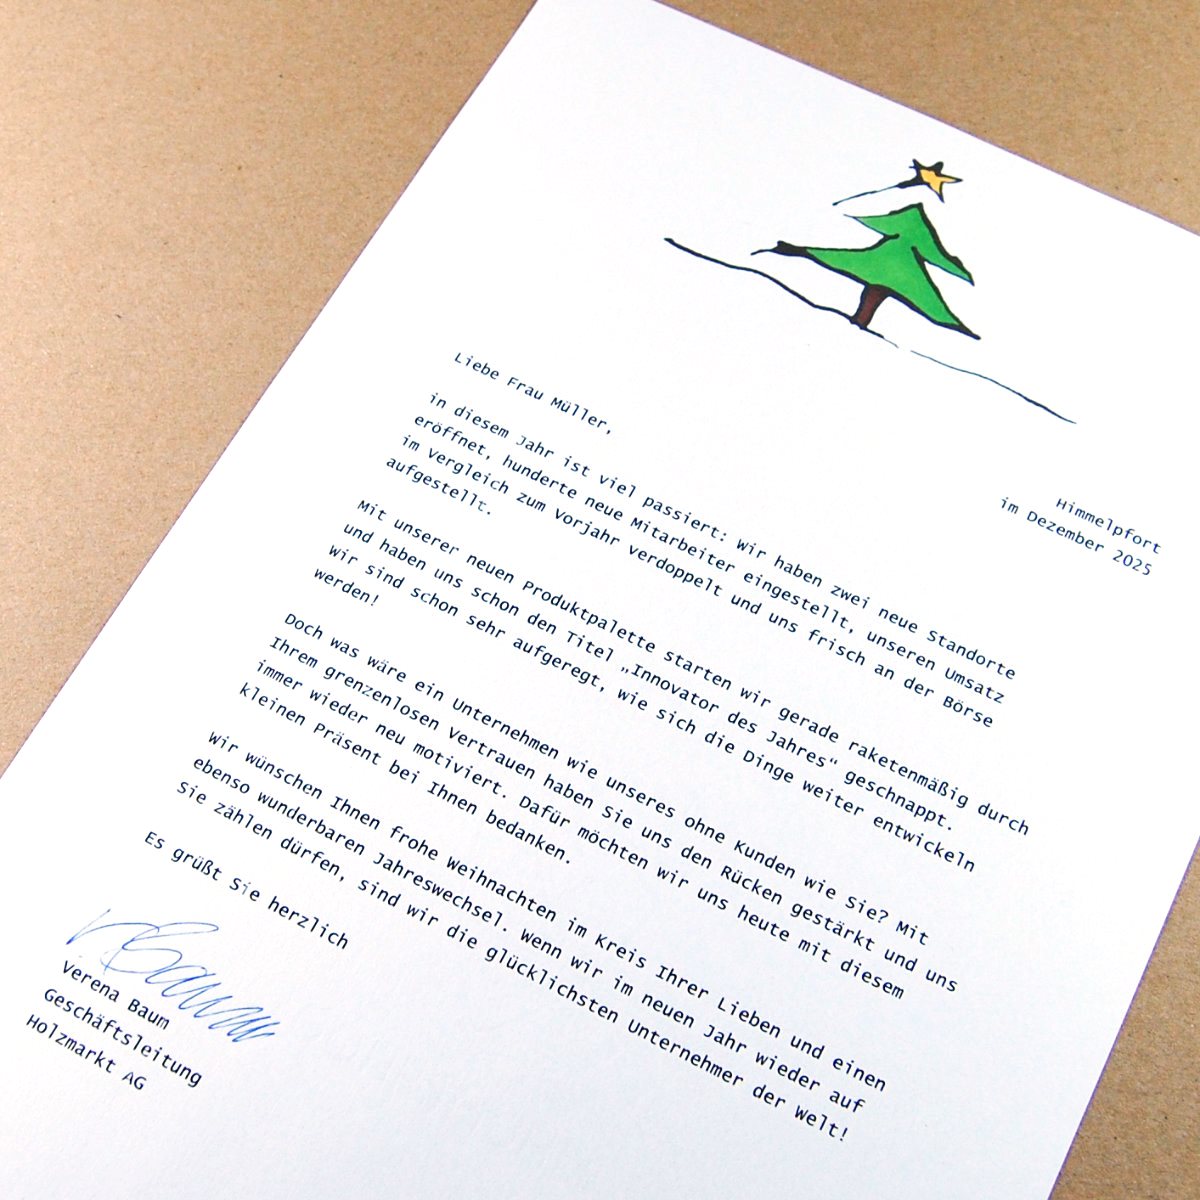 There is plenty of space on the letterhead for your personal Christmas message